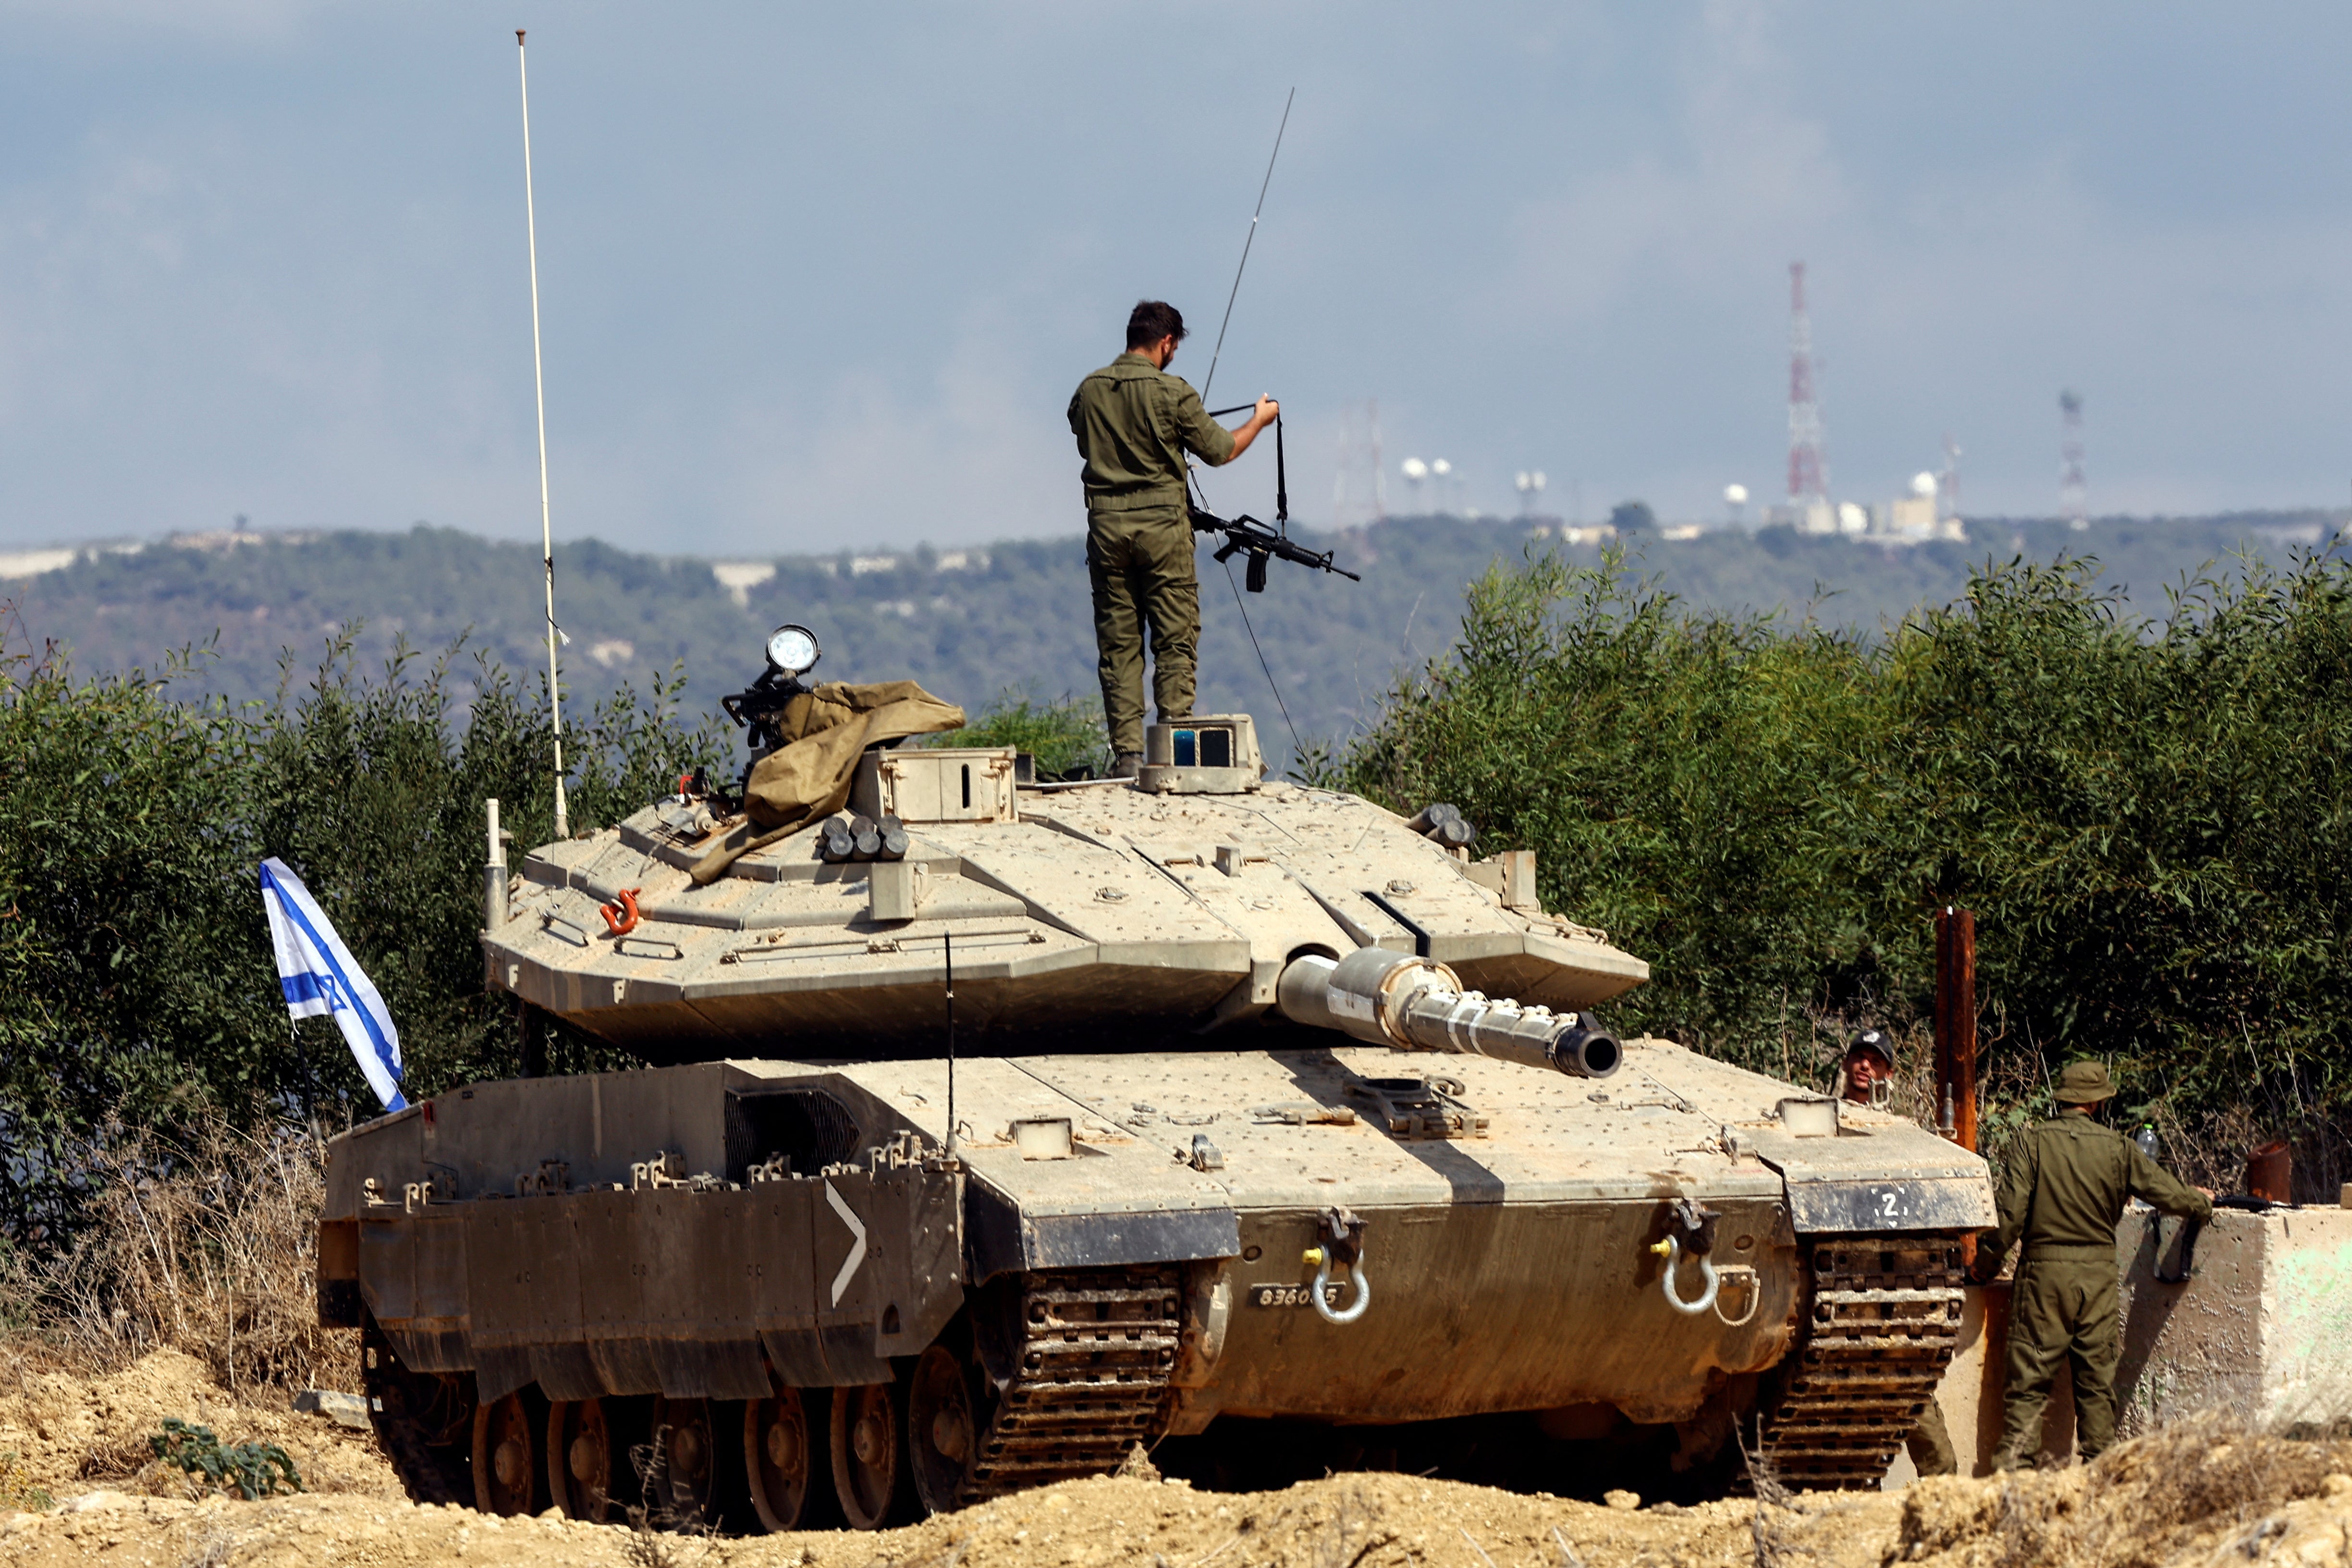 An Israeli soldier adjusts his rifle as he stands on a tank near Israel's border with Lebanon